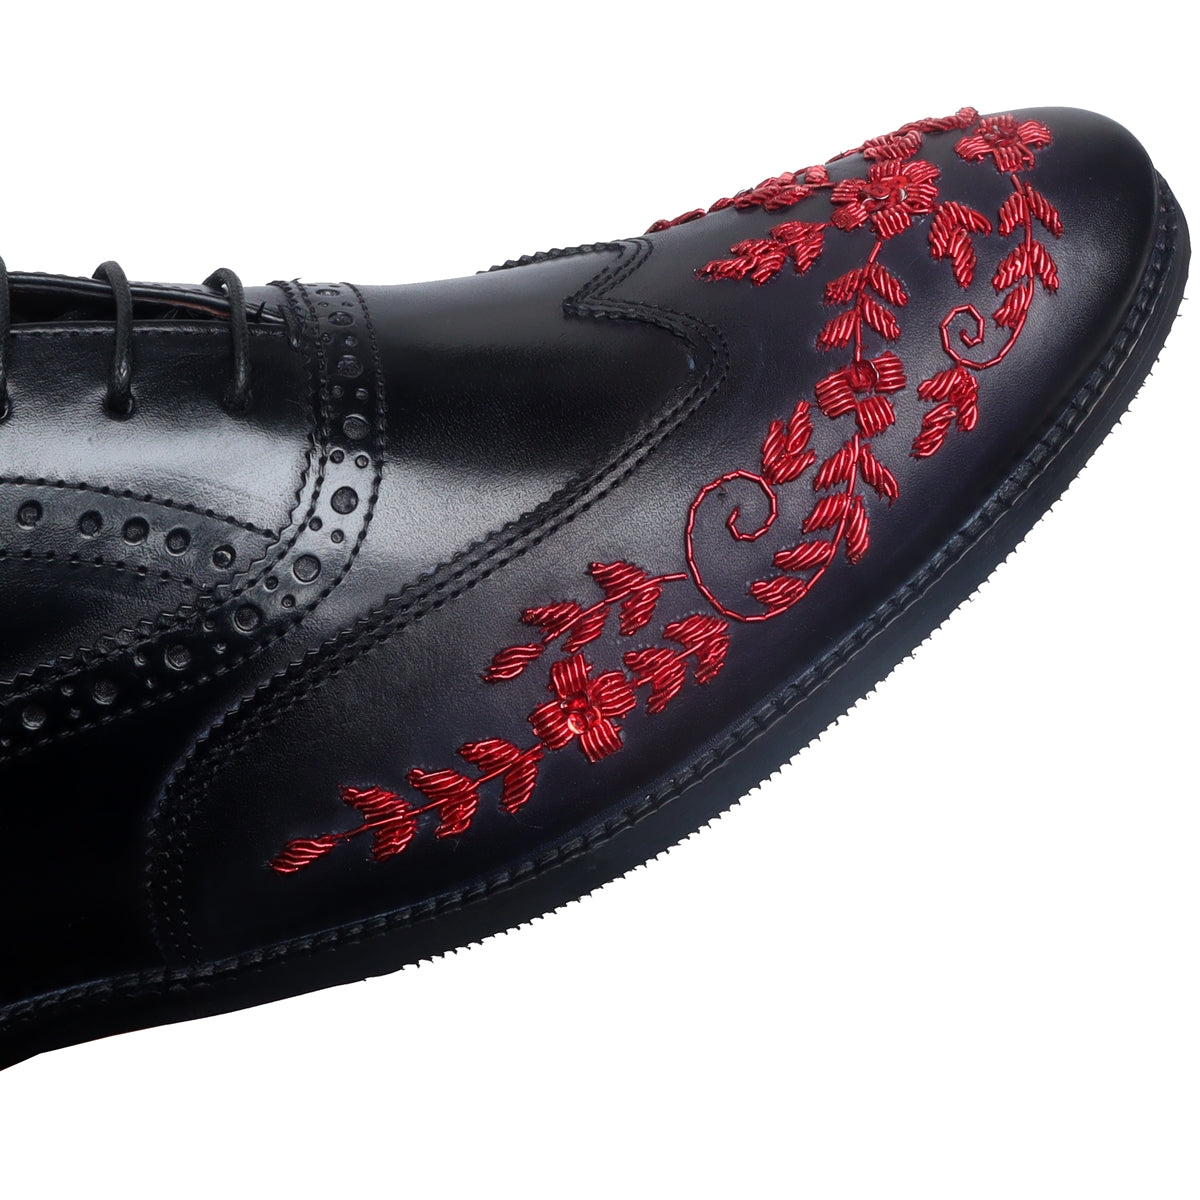 Red Leather Formal Lace-Up Shoes Black Zardosi Wingtip Toe by Brune 